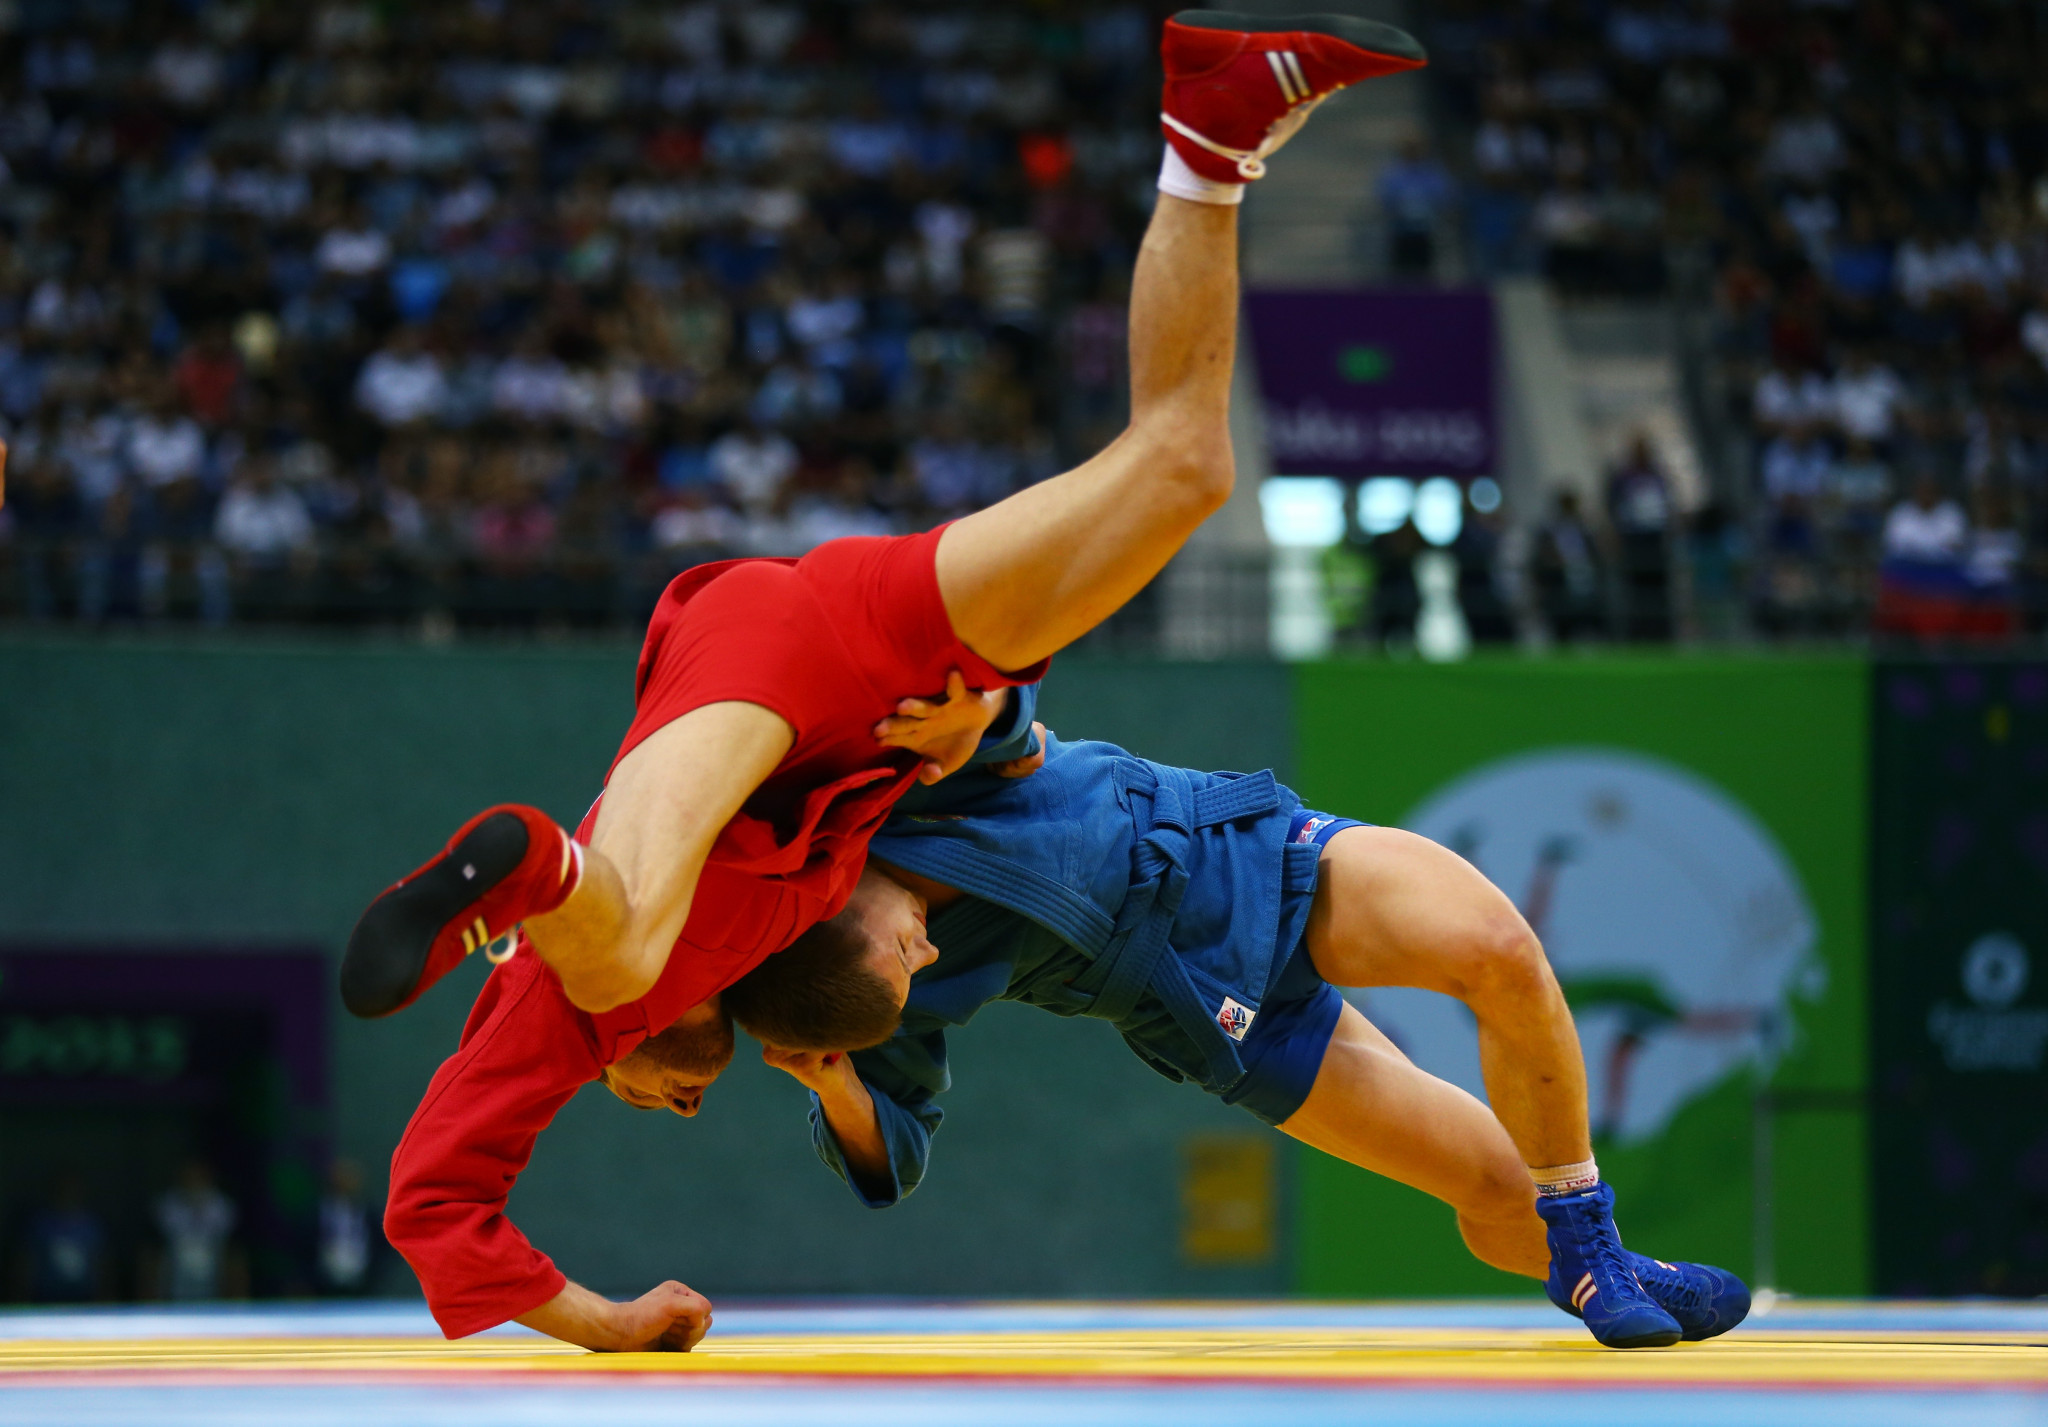 Sambo is said to have gained popularity in Japan from the 1970s ©Getty Images